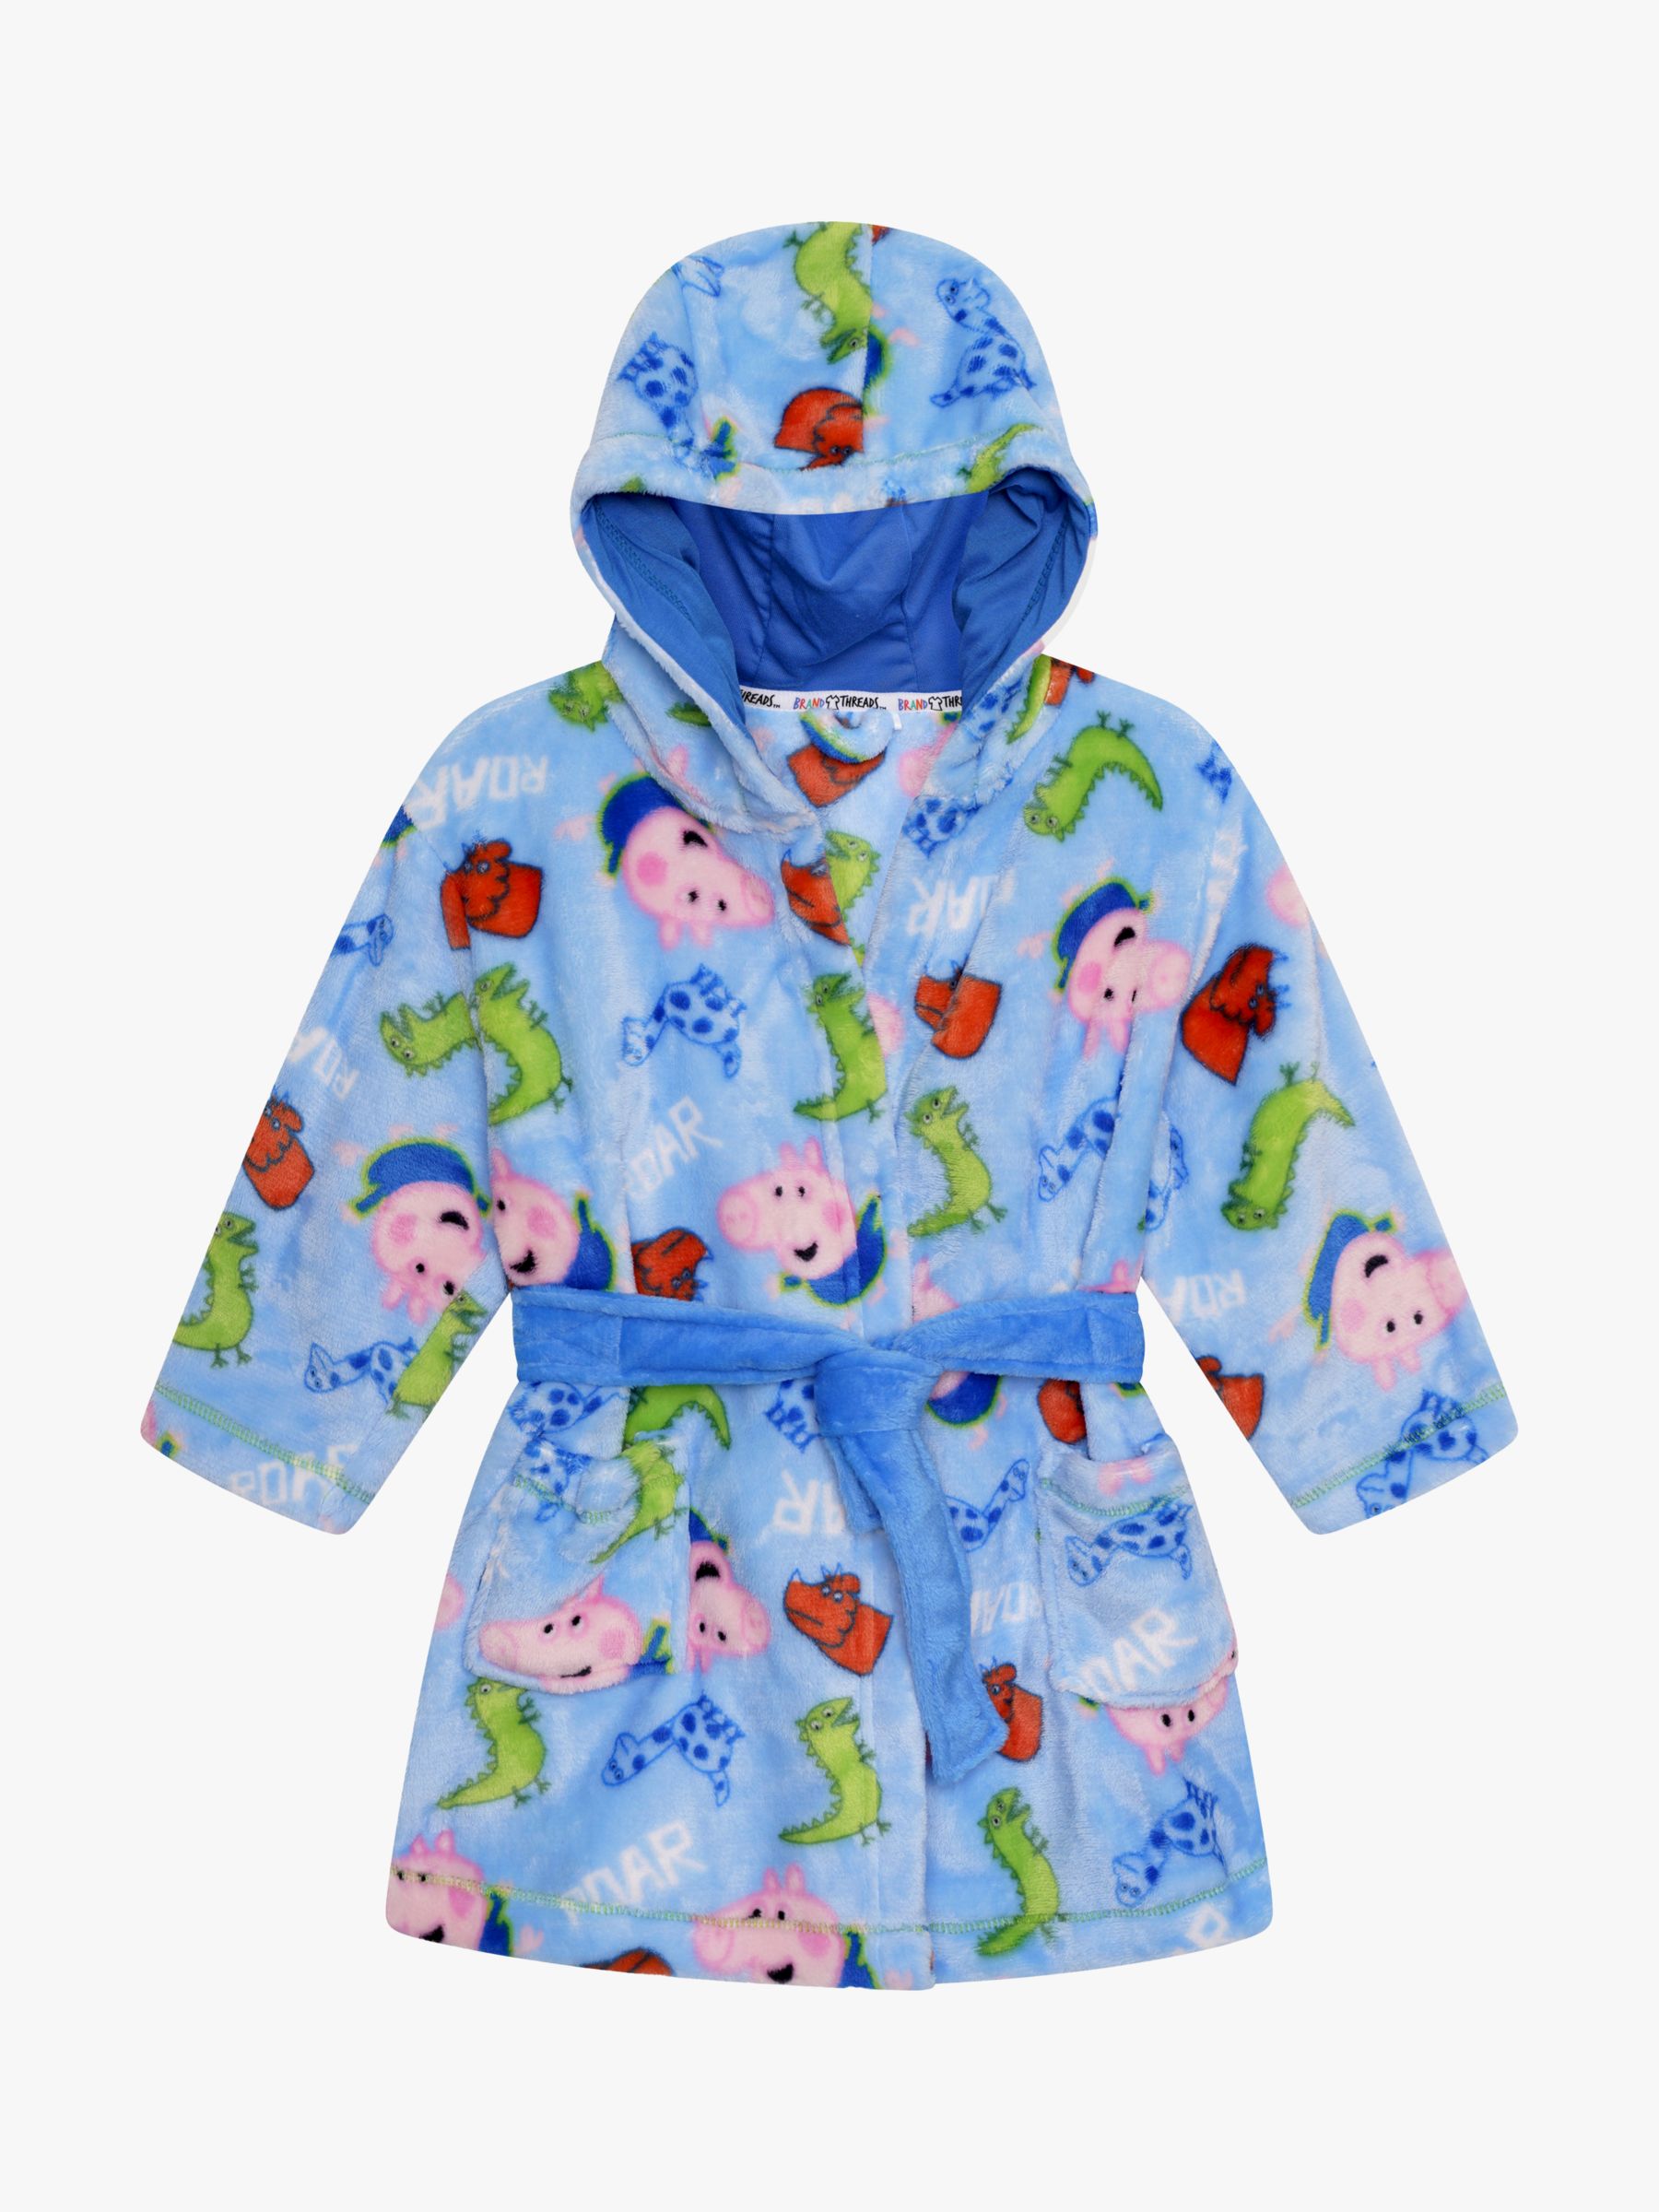 Brand Threads Kids' George Pig Dressing Gown, Blue, 2-3 years